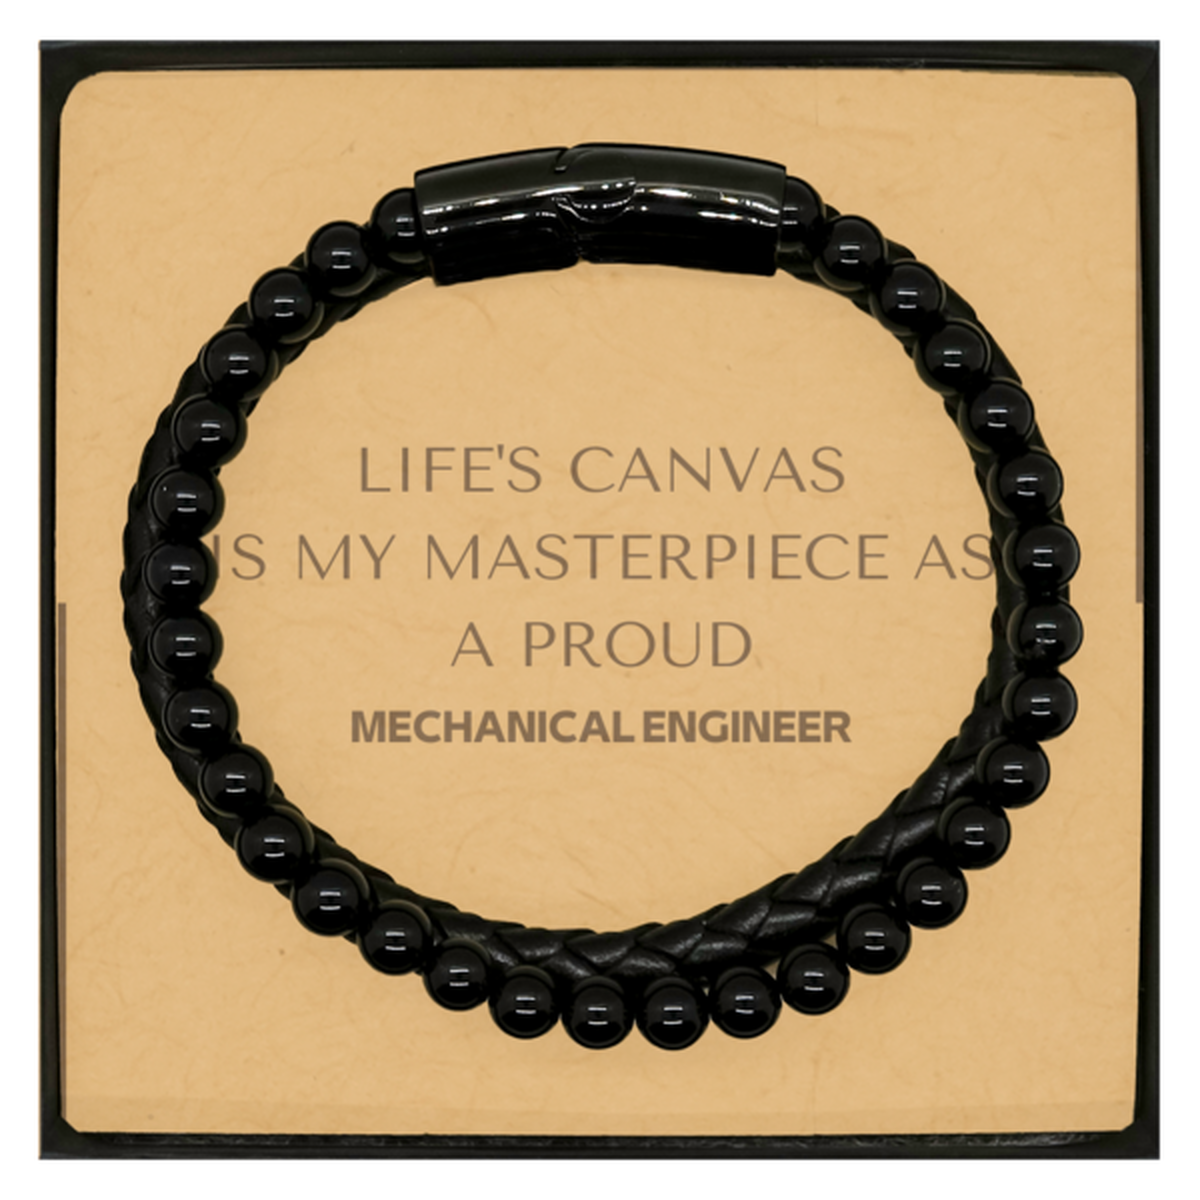 Proud Mechanical Engineer Gifts, Life's canvas is my masterpiece, Epic Birthday Christmas Unique Stone Leather Bracelets For Mechanical Engineer, Coworkers, Men, Women, Friends